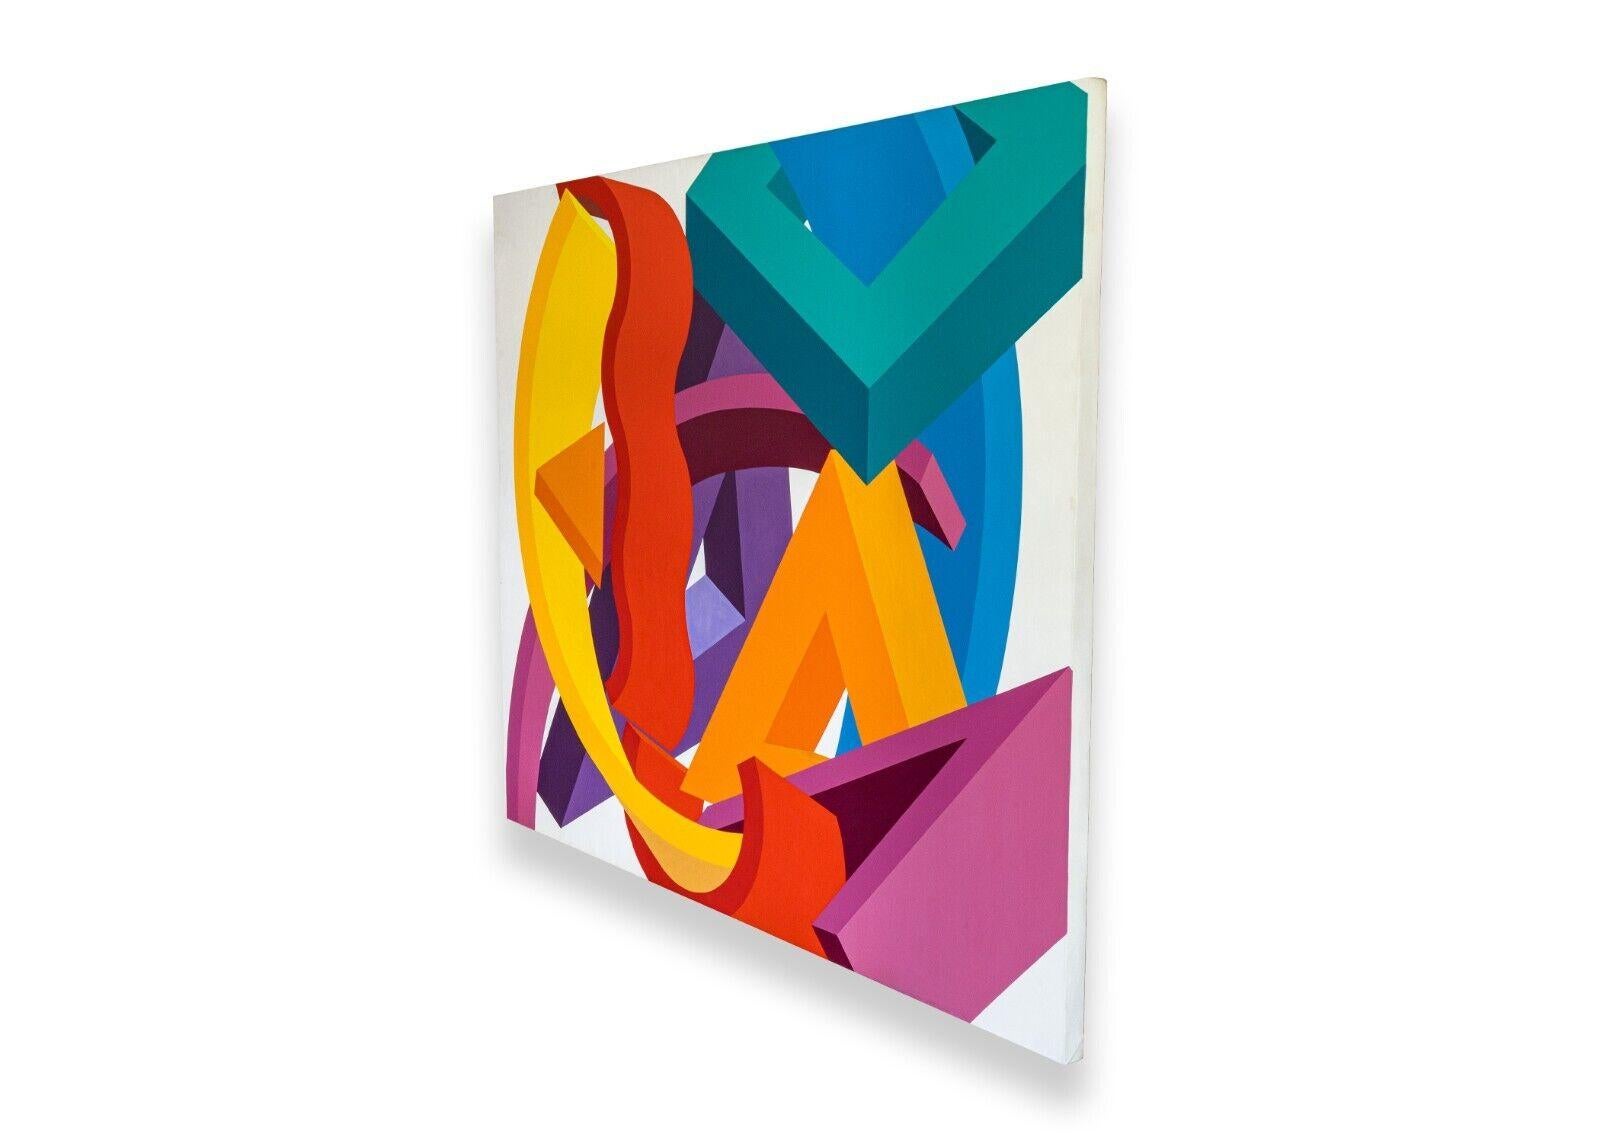 A bold modern abstract acrylic painting on canvas by Jeff Kalban. Signed and dated 1996 on verso. A monumental painting with bright geometric forms and shapes. Per Kalban, 